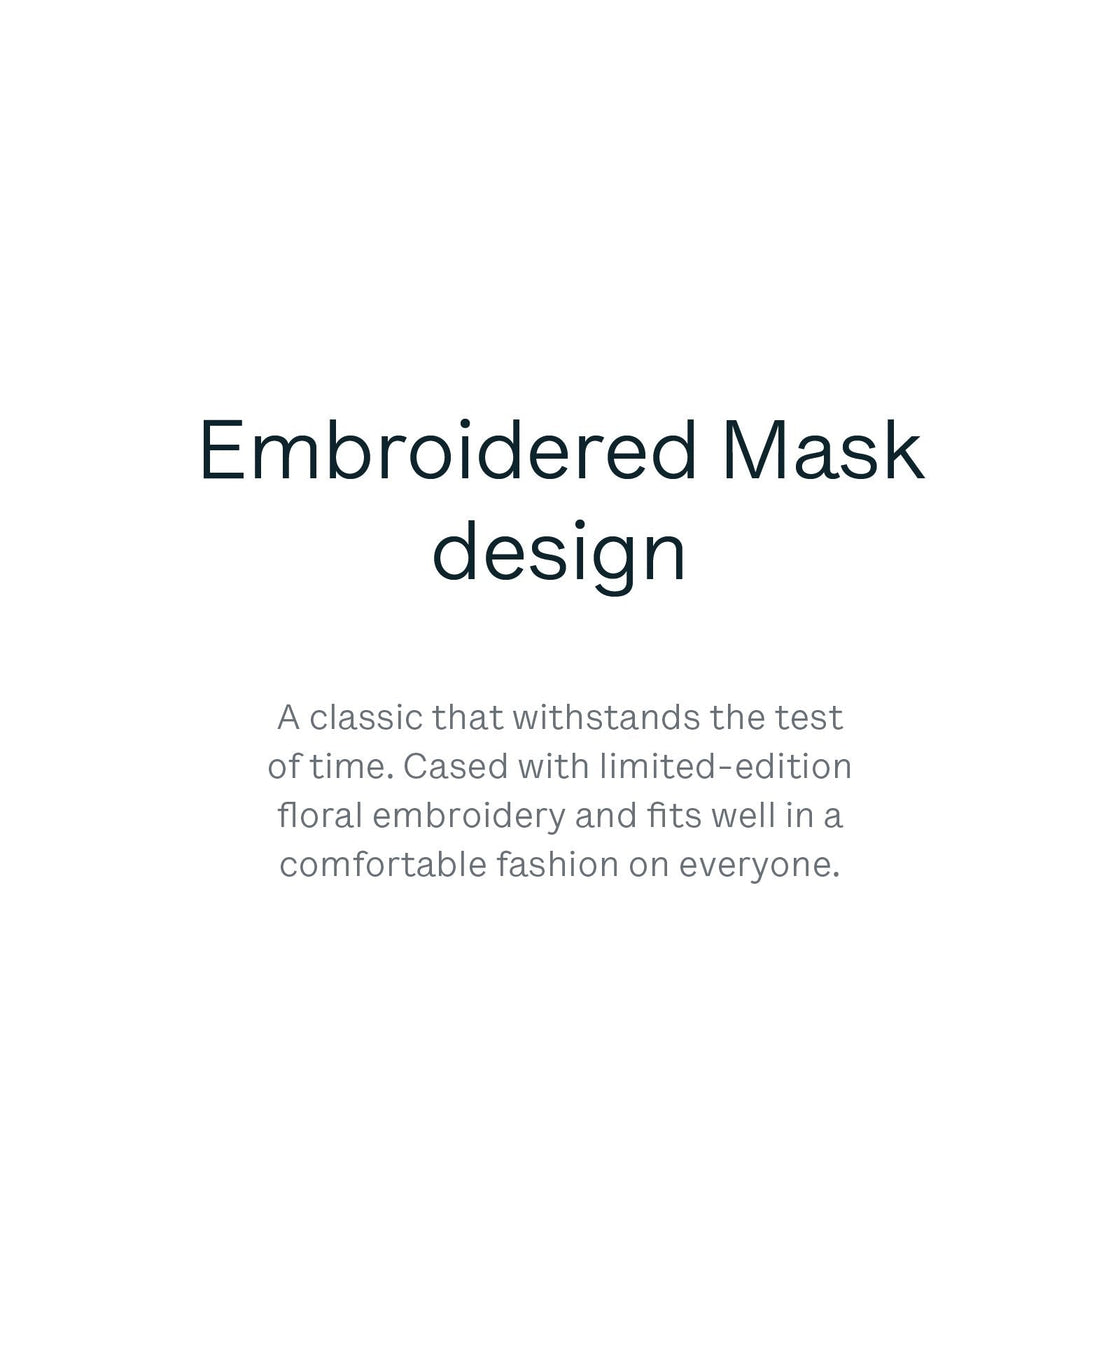 3 Universal Embroidered Masks